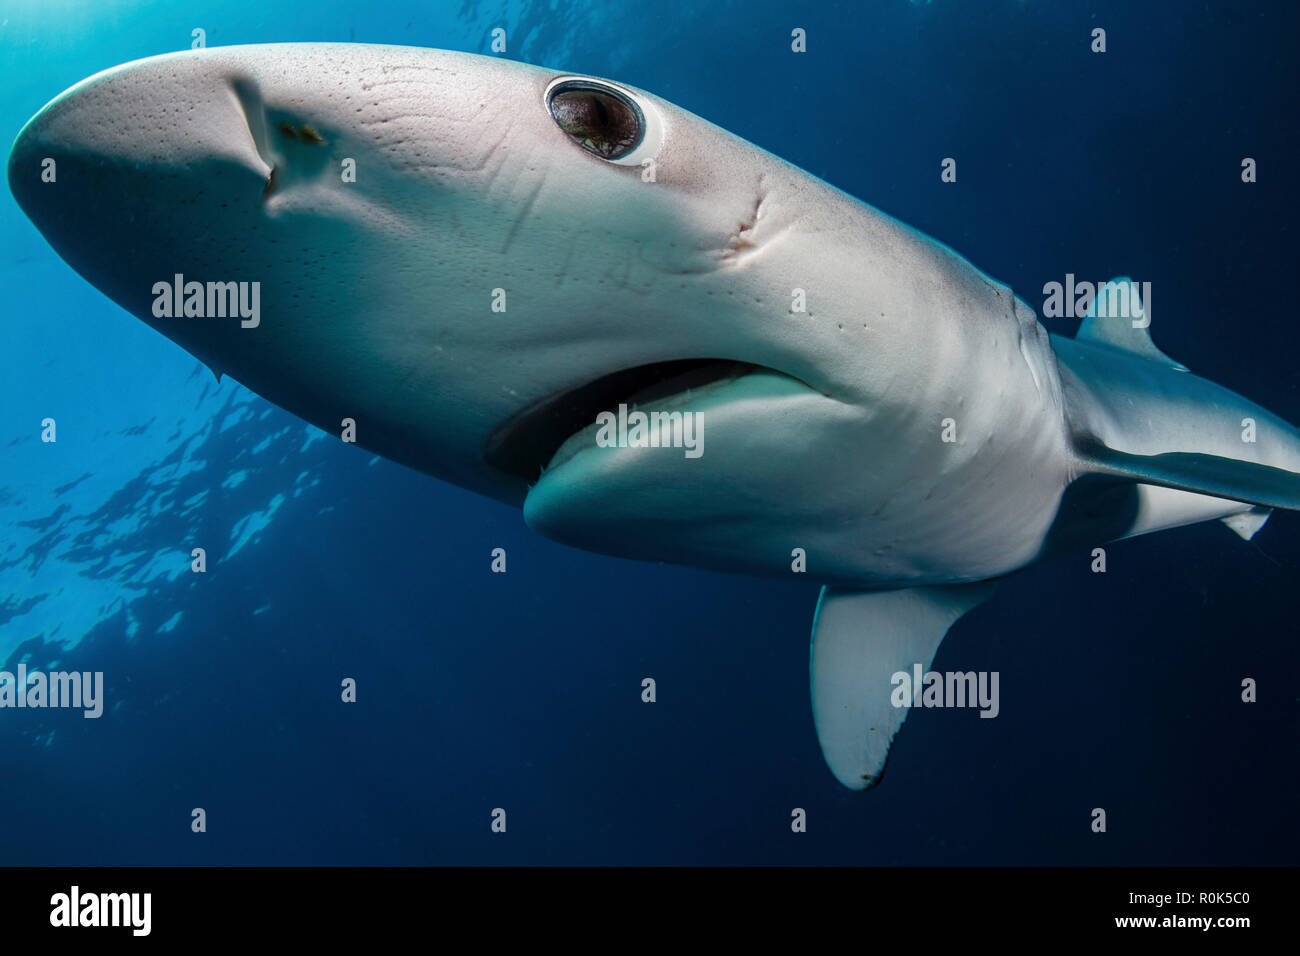 Close-up view of a blue shark, South Africa. Stock Photo